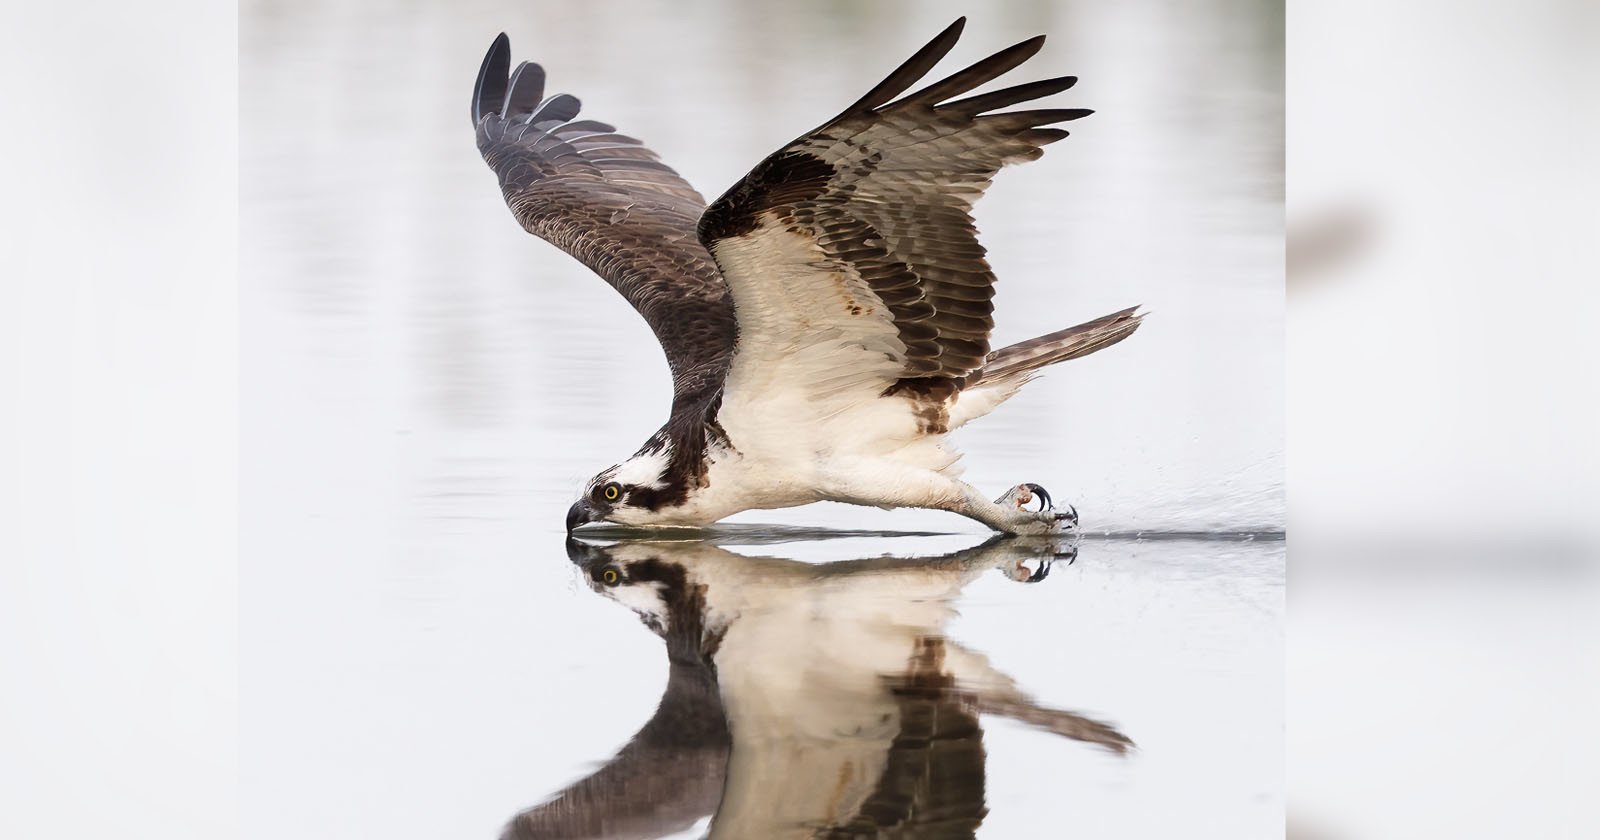 Spectacular and Unusual Photo of an Osprey Gliding on the Water’s Surface